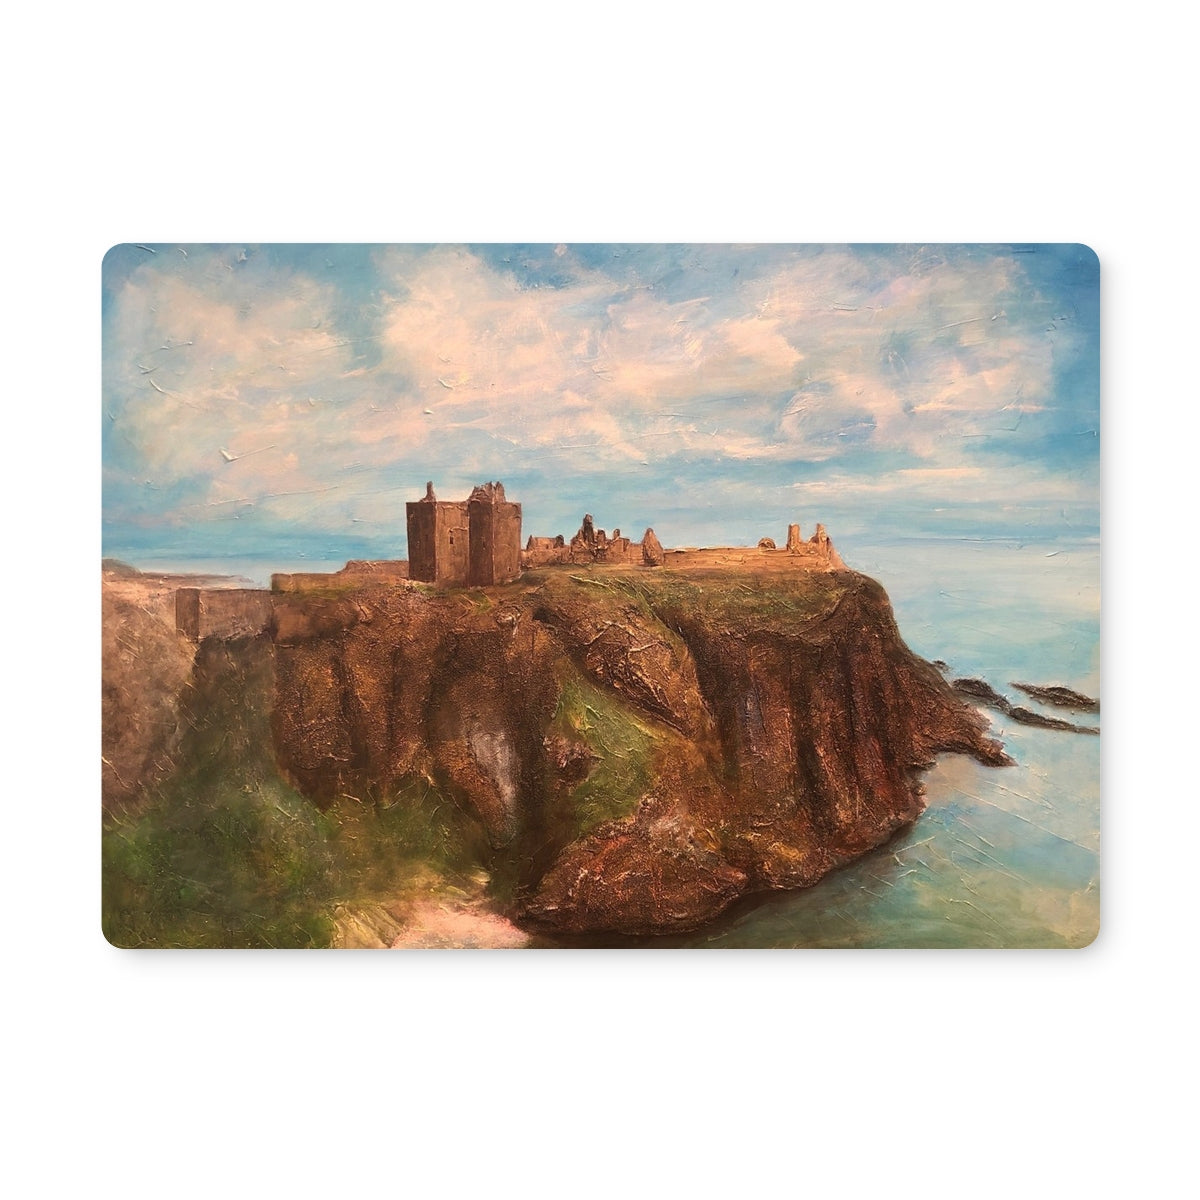 Dunnottar Castle Art Gifts Placemat-Homeware-Prodigi-2 Placemats-Paintings, Prints, Homeware, Art Gifts From Scotland By Scottish Artist Kevin Hunter